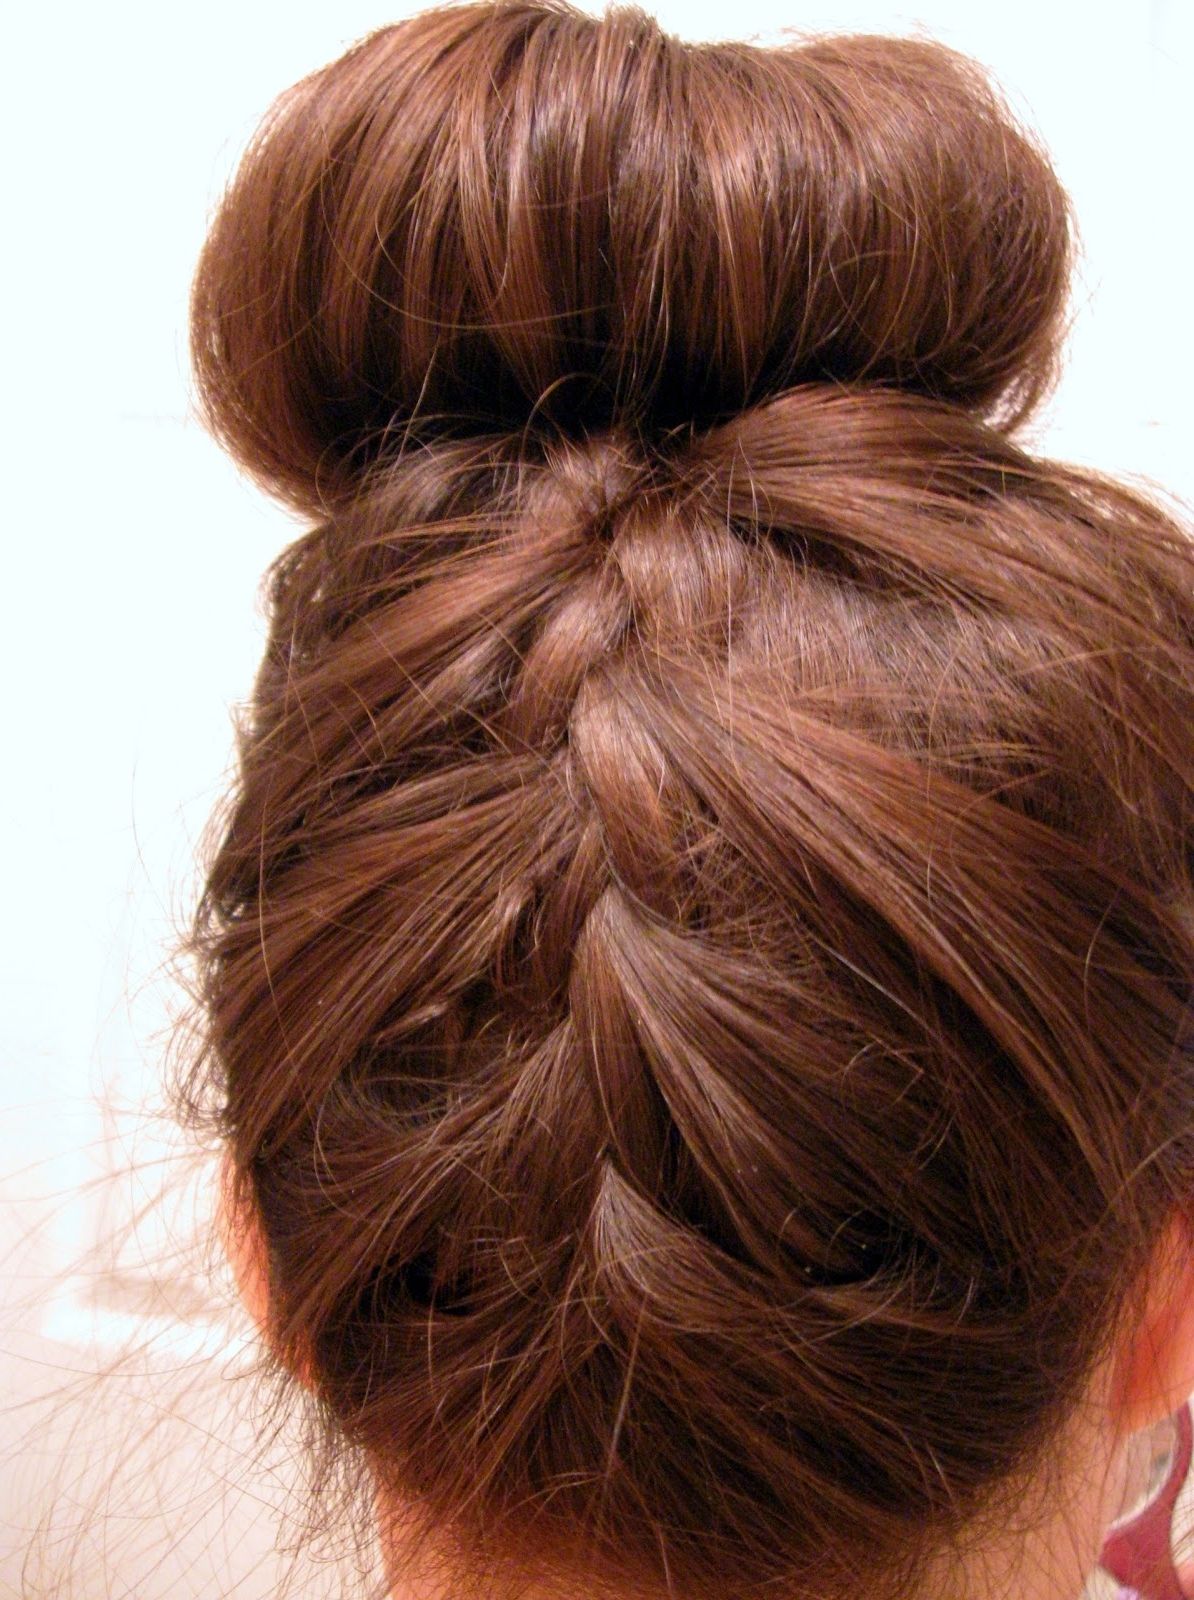 Famous Upside Down French Braids Into A Bun Intended For Simply, Autumn Rush: Upside Down French Braid & Top Knot! (View 15 of 15)